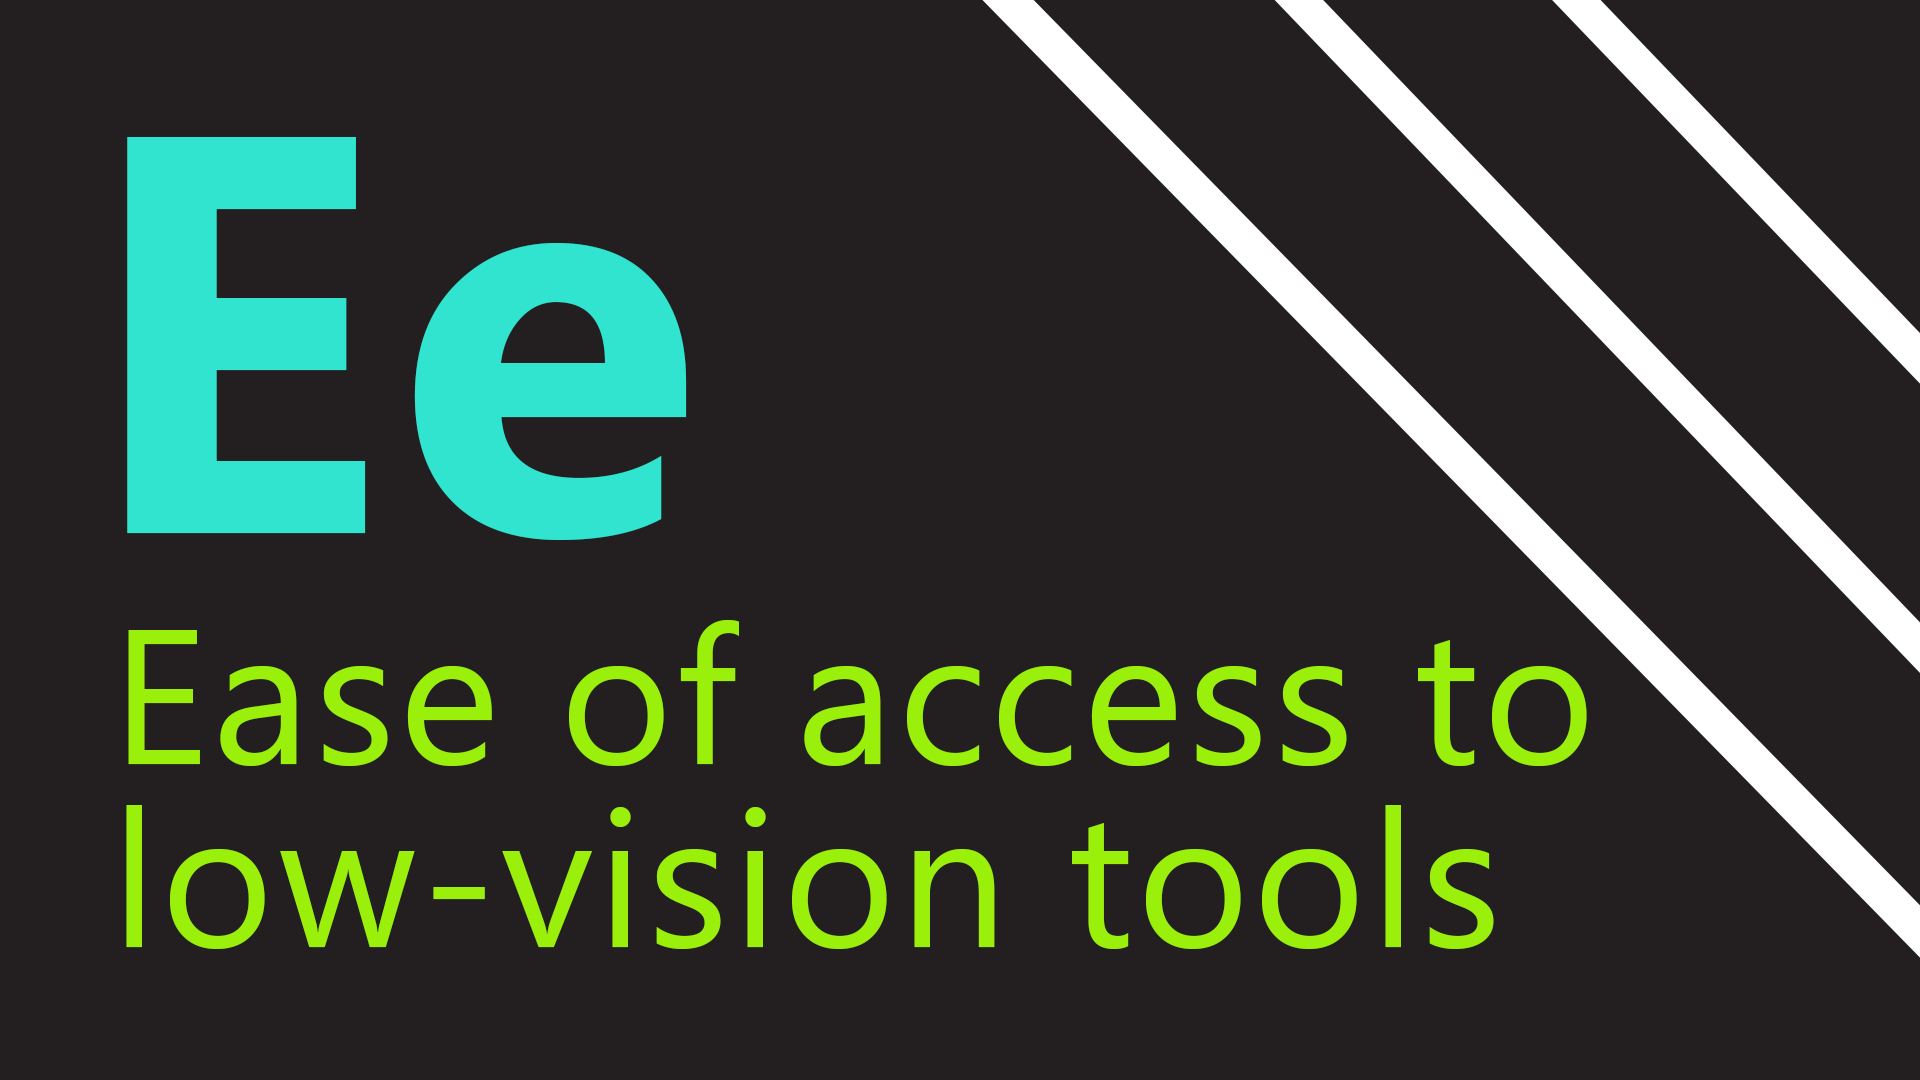 : E stands for ease of access to low-vision tools.